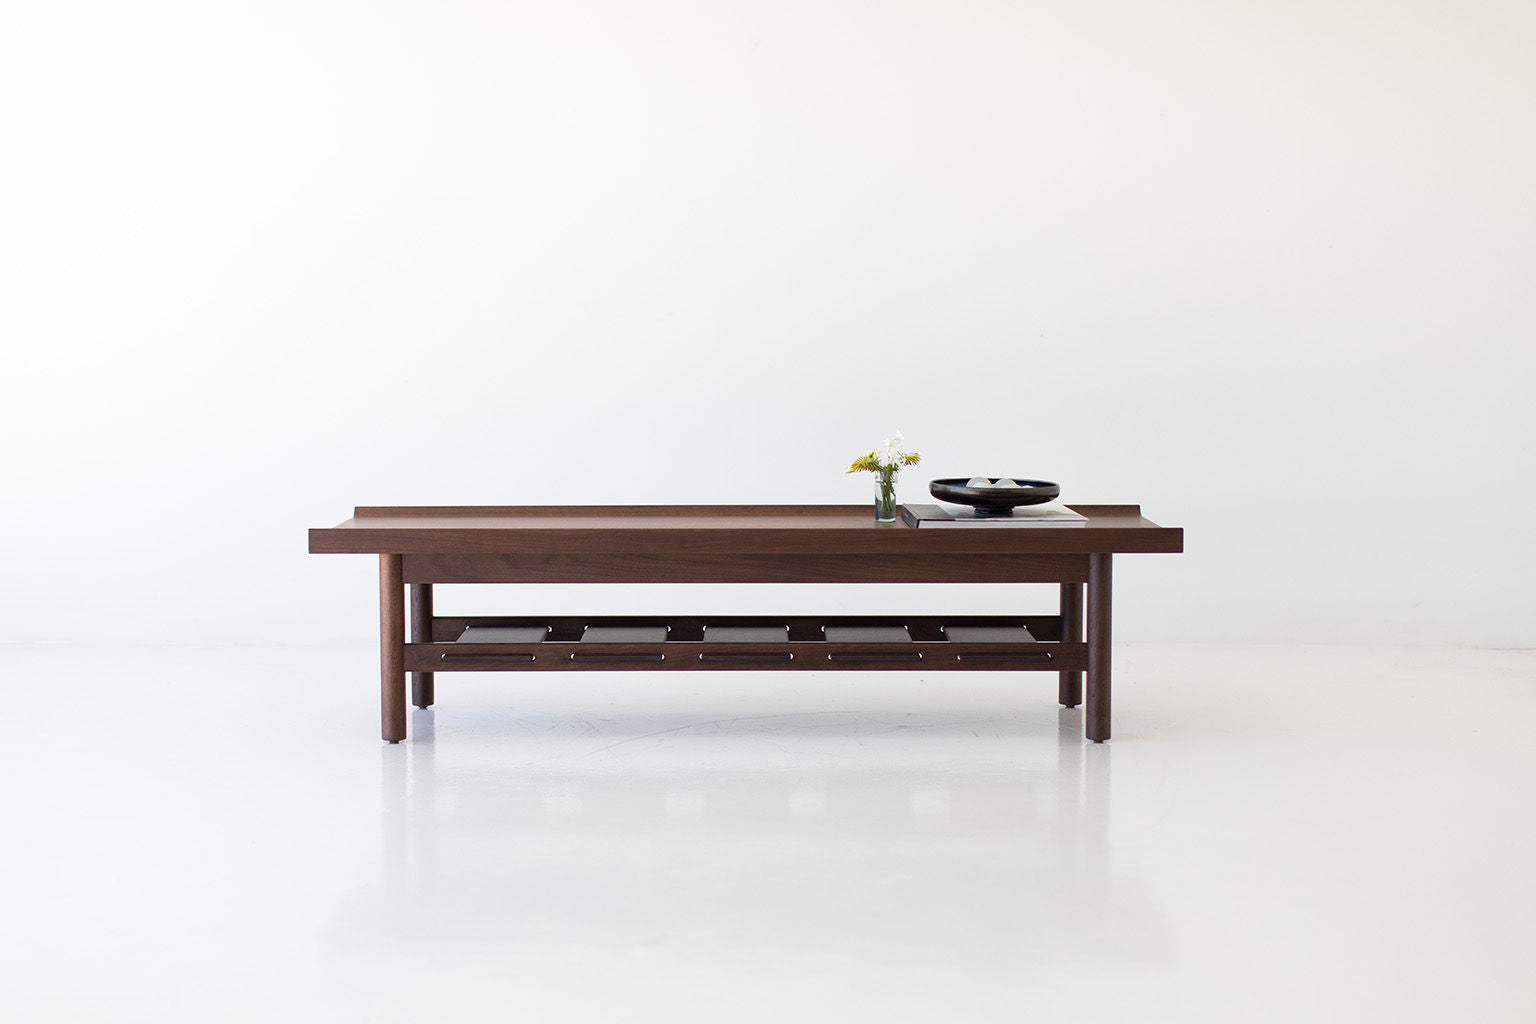 Lawrence Peabody Modern Coffee Table - 2009 - Craft Associates Furniture